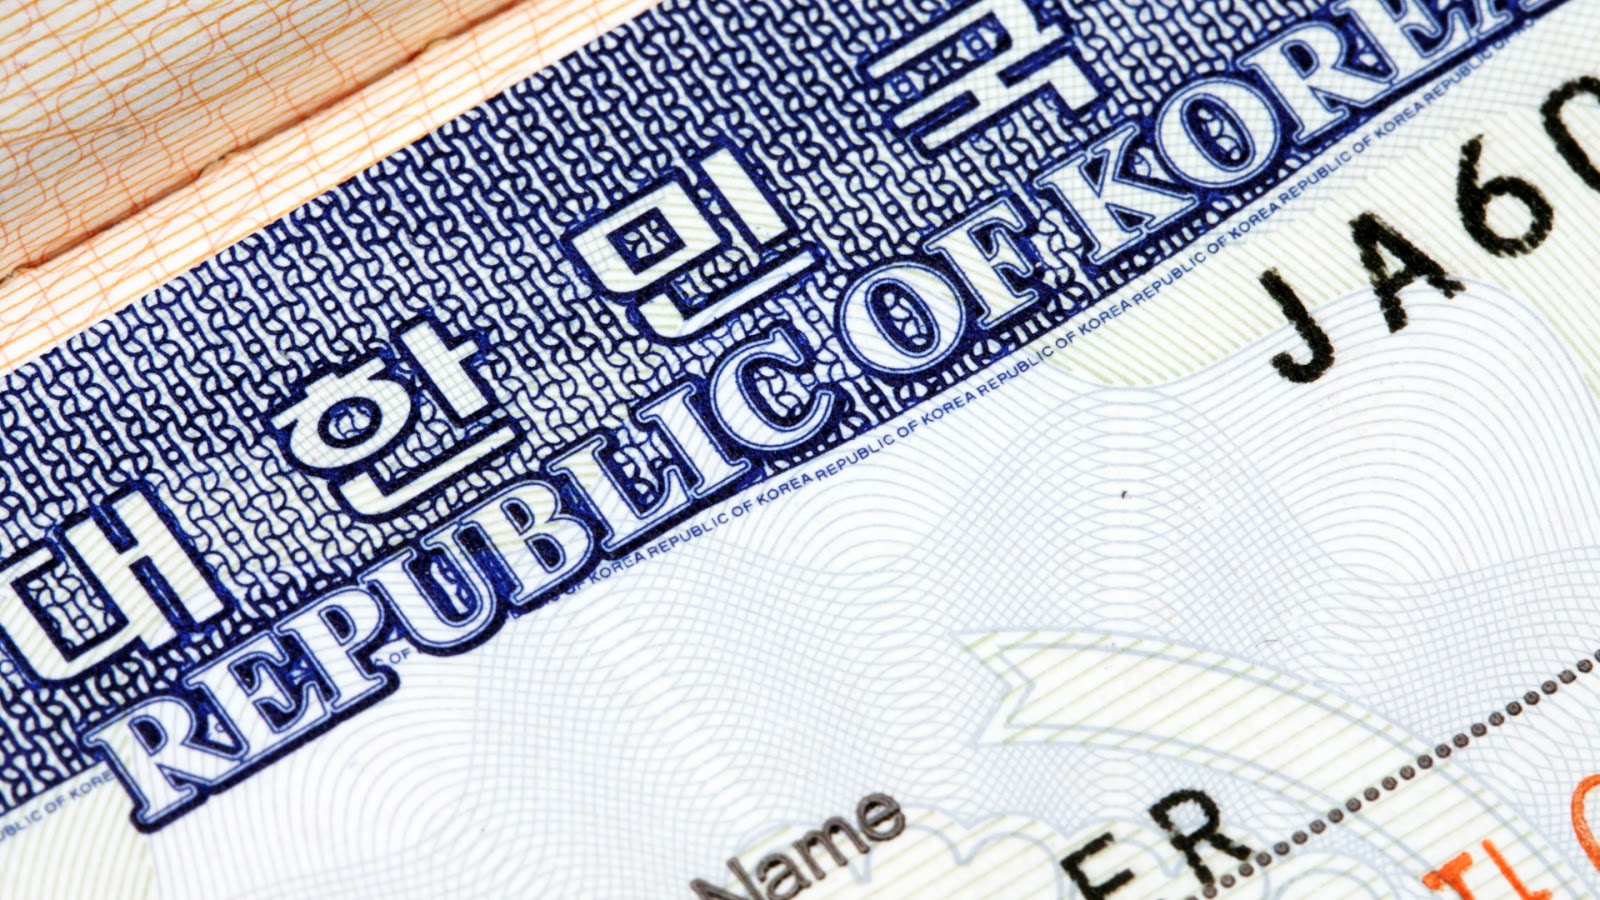 Find out what visa you need to enter the country